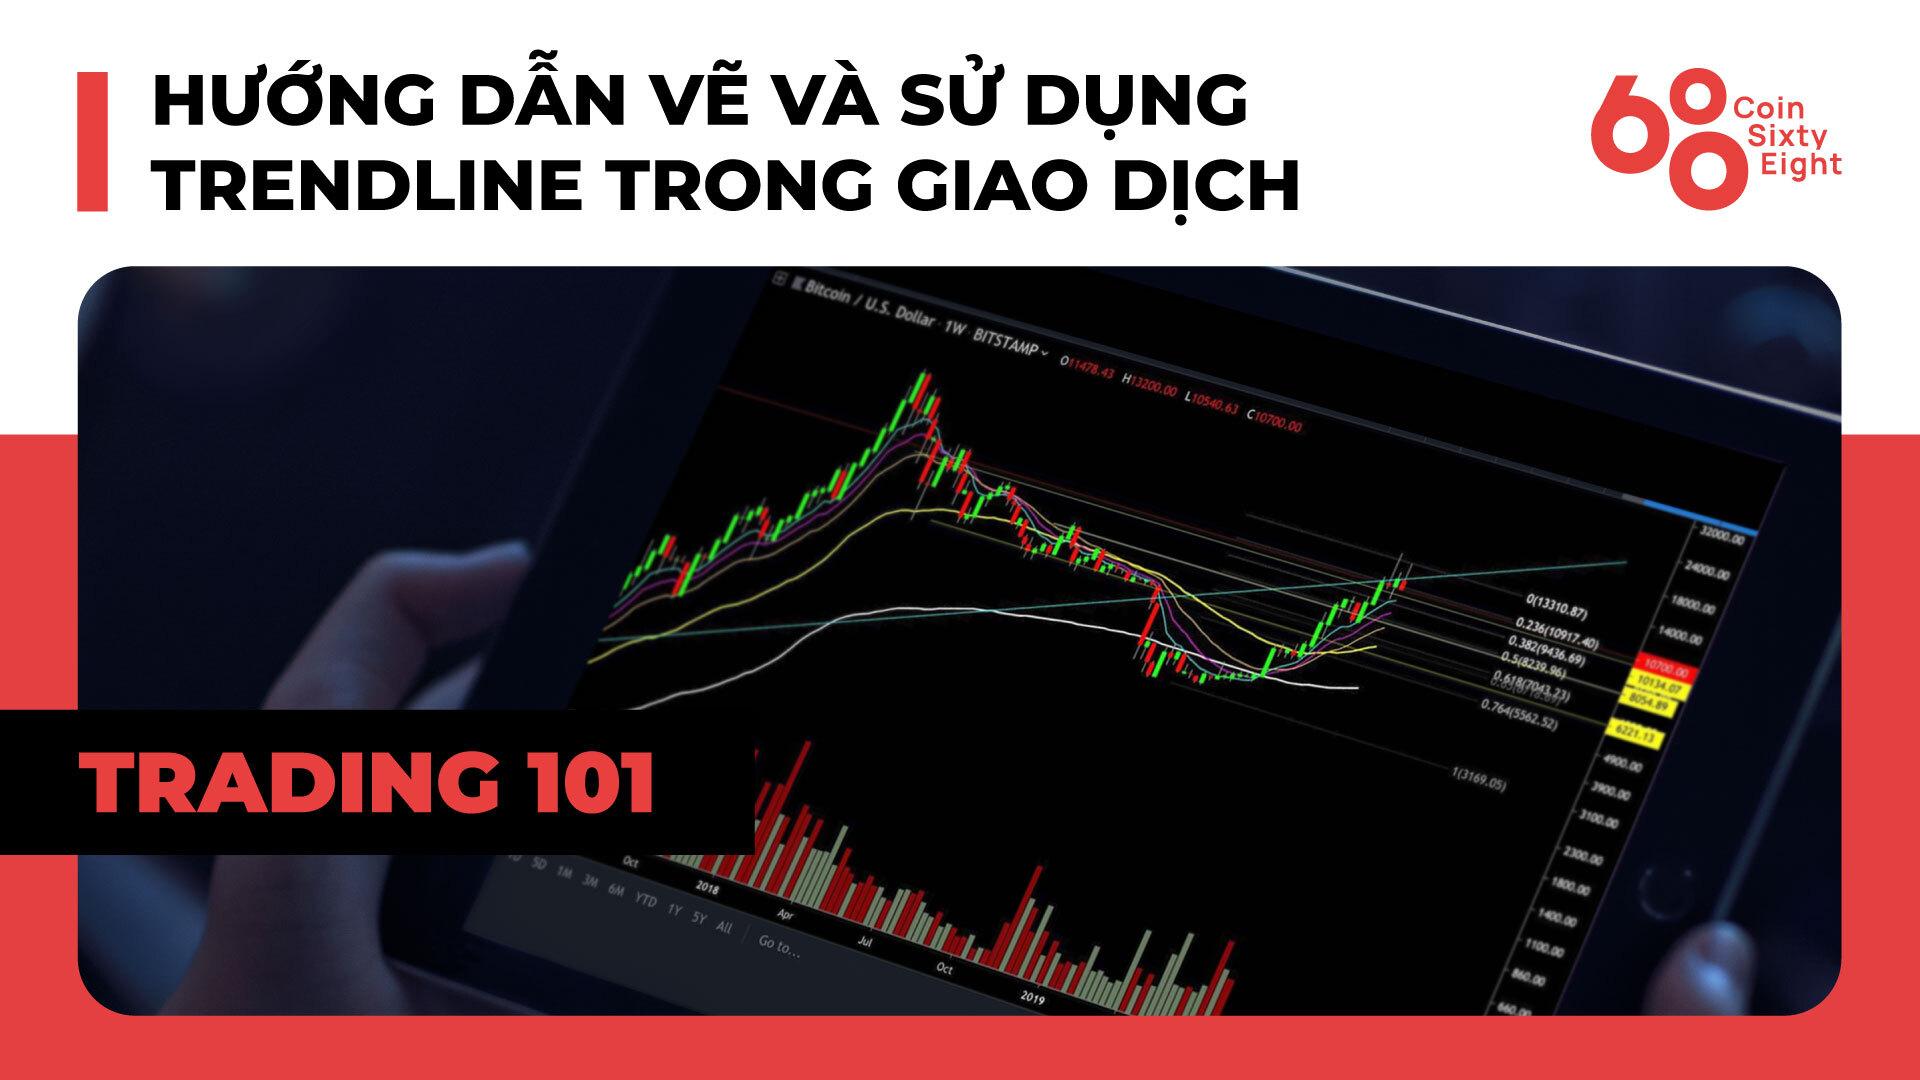 lop-giao-dich-101-price-action-trading-phan-16-huong-dan-ve-va-su-dung-trendline-trong-giao-dich